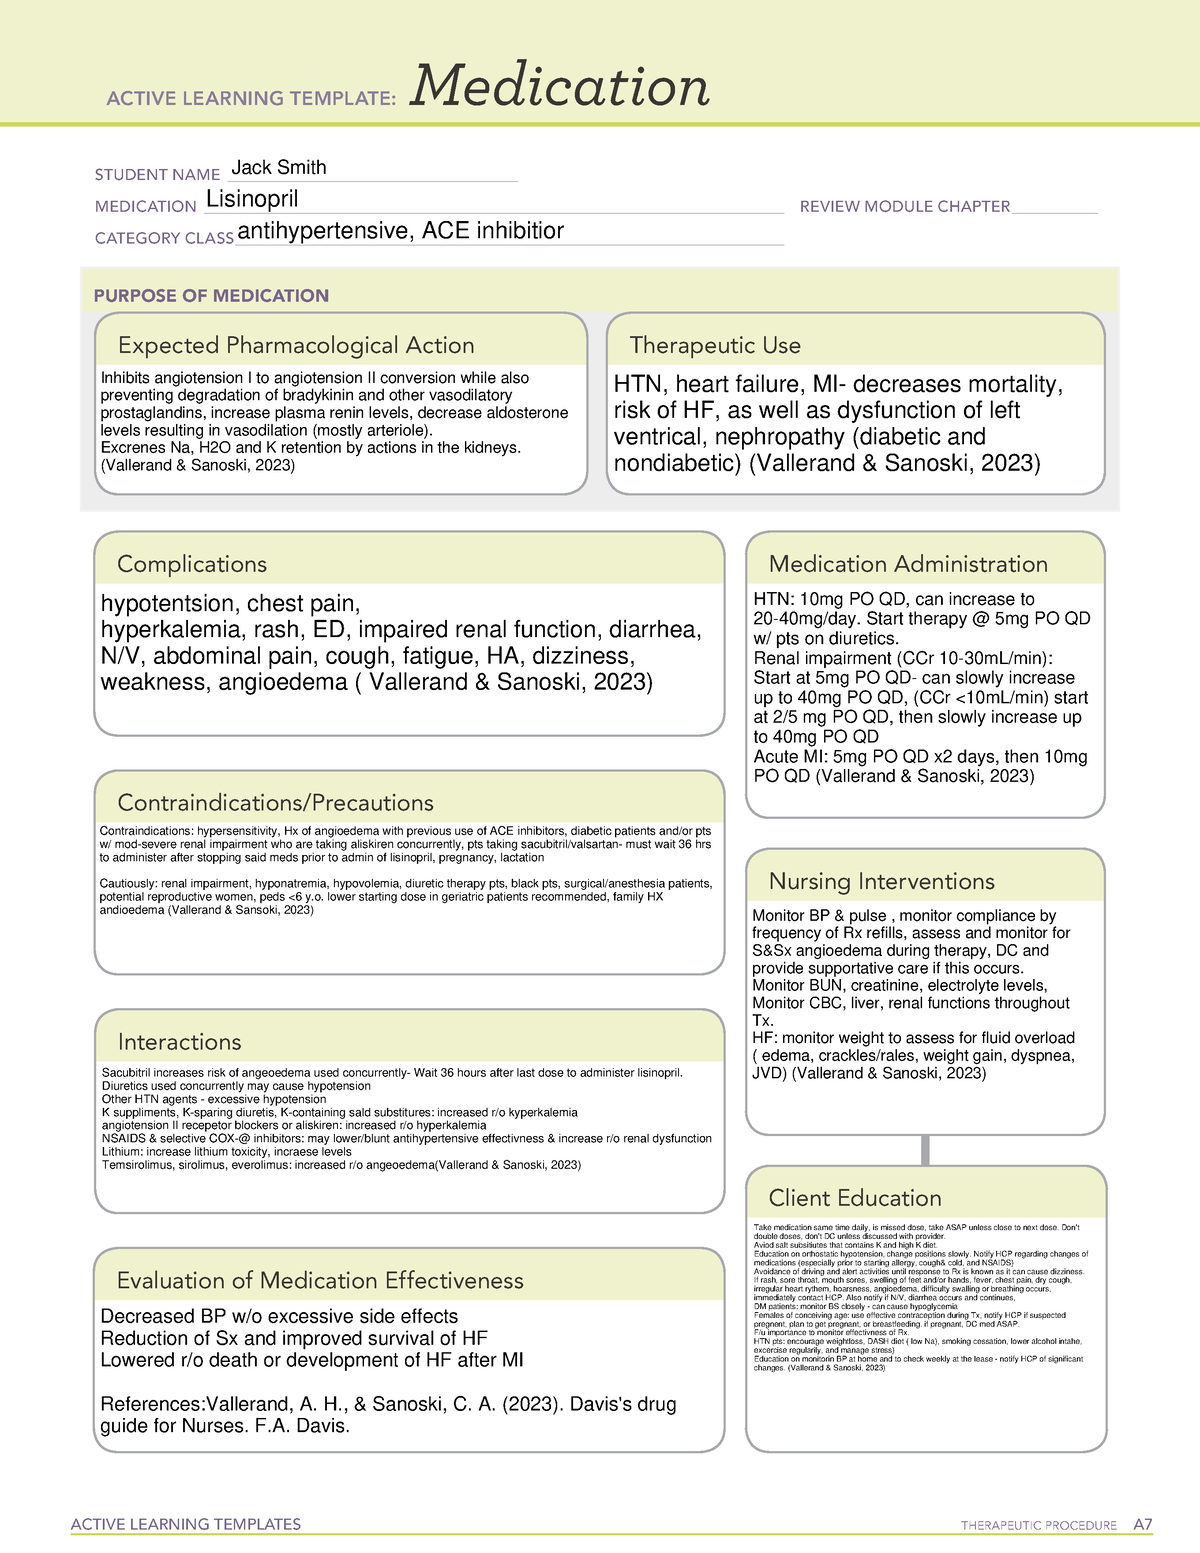 Active Learning Template Lisinopril ACTIVE LEARNING TEMPLATES